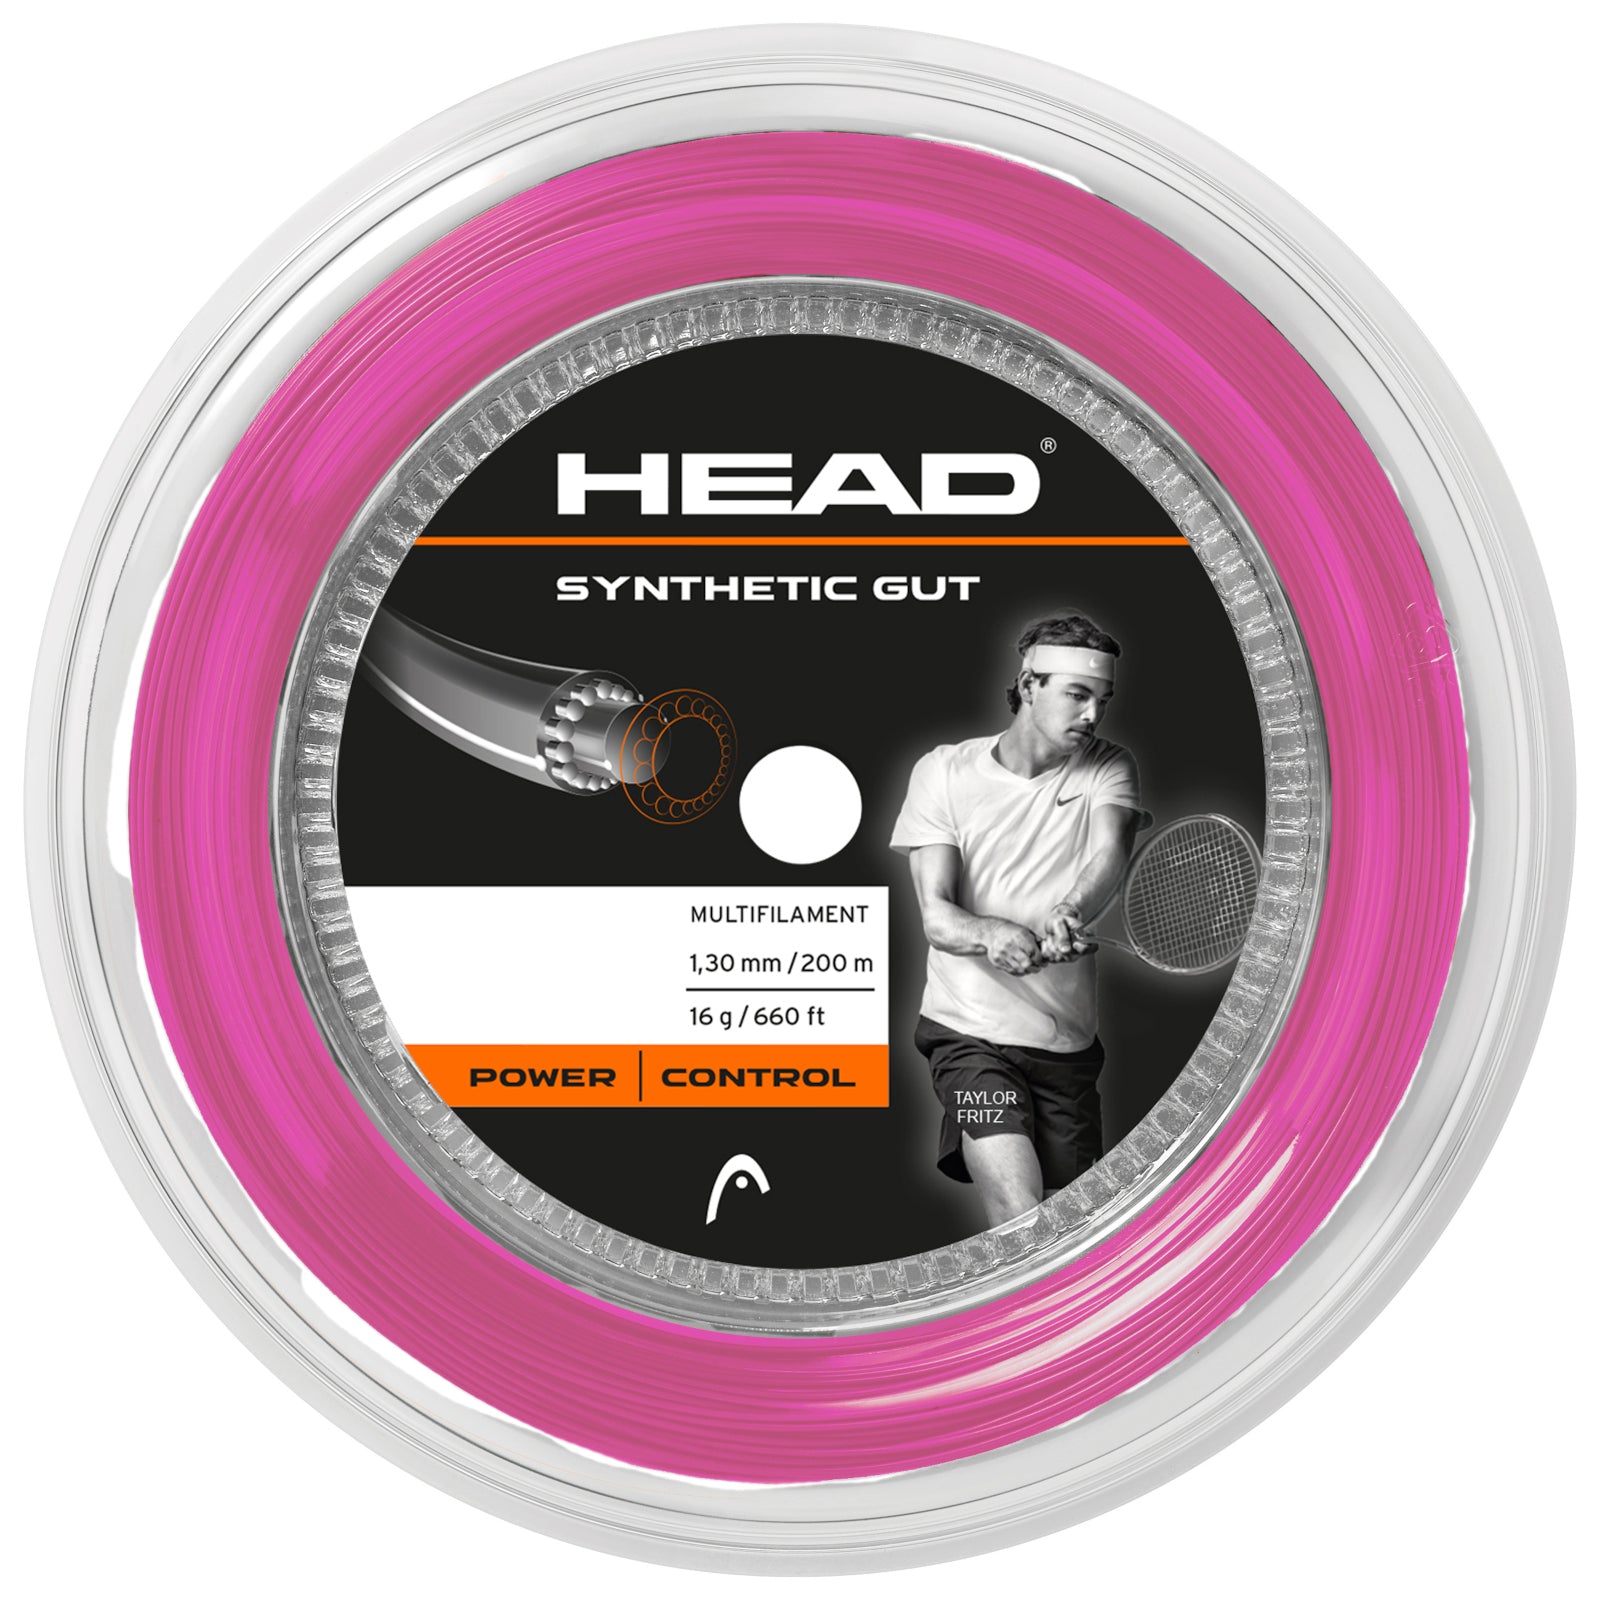 Head Synthetic Gut Tennis String Reel ( 16G Gold ) 